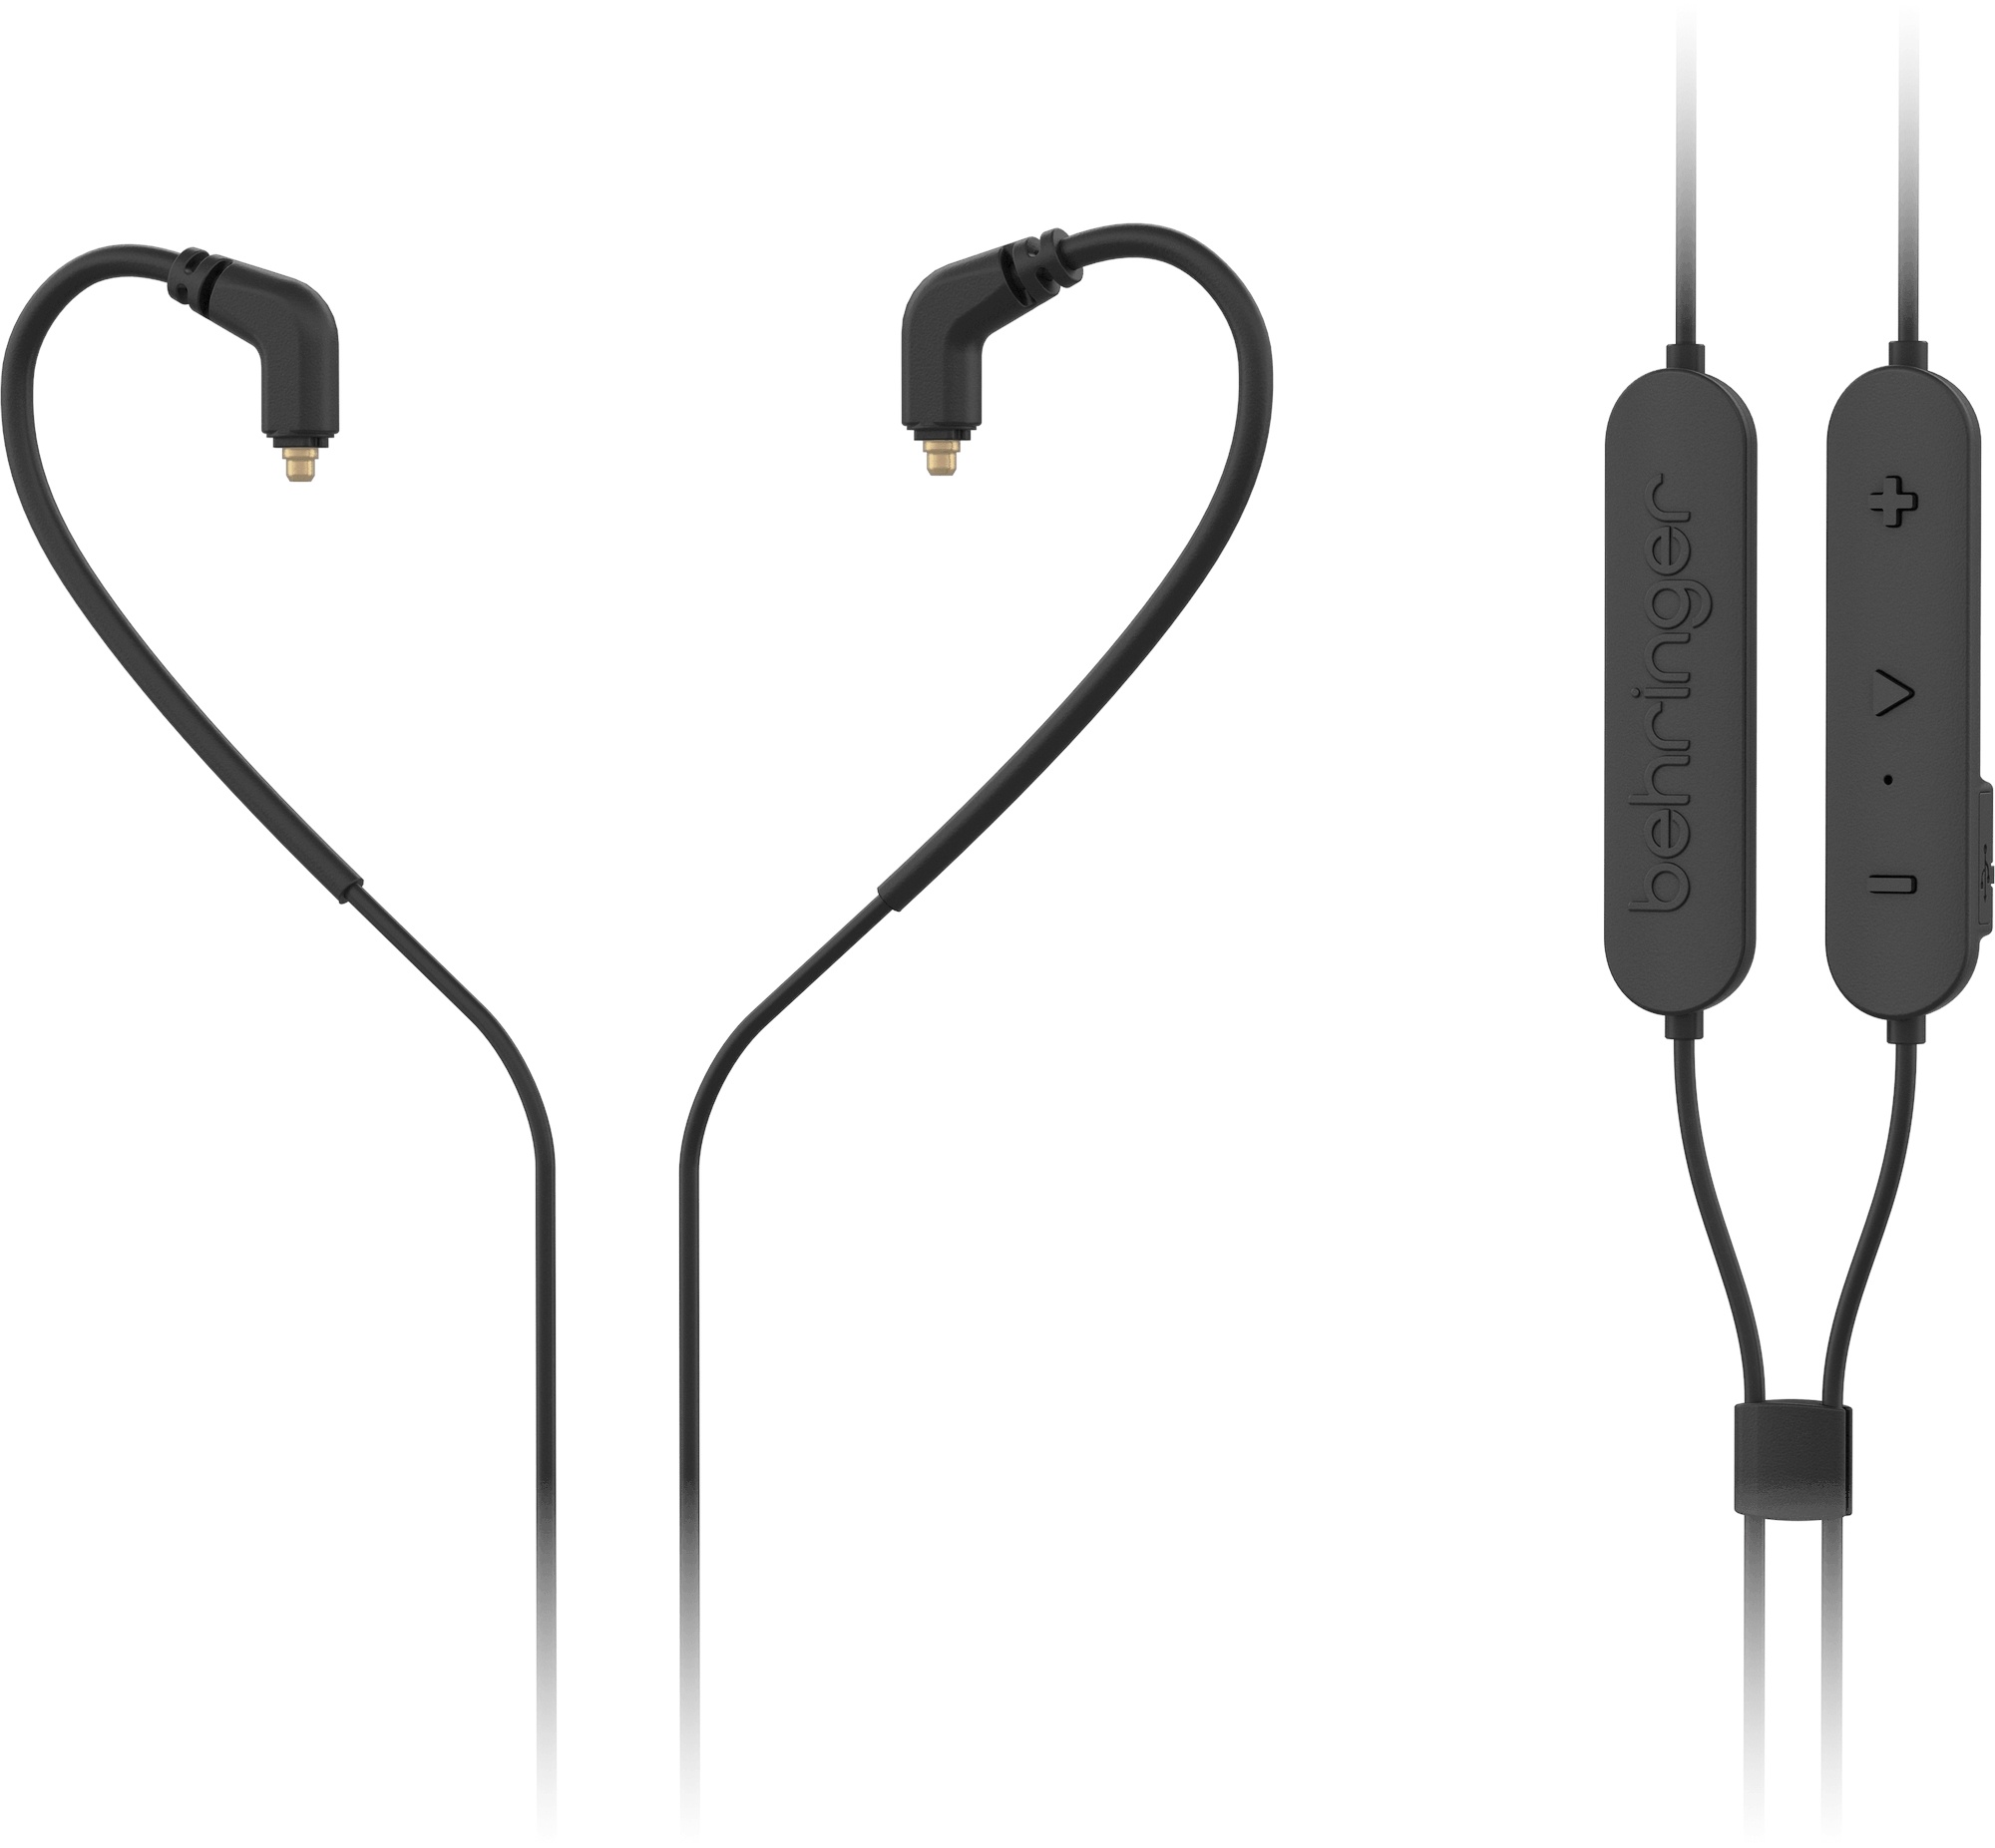 Behringer BT251-BK Bluetooth Wireless Adapter for In-Ear Monitors with MMCX Connectors